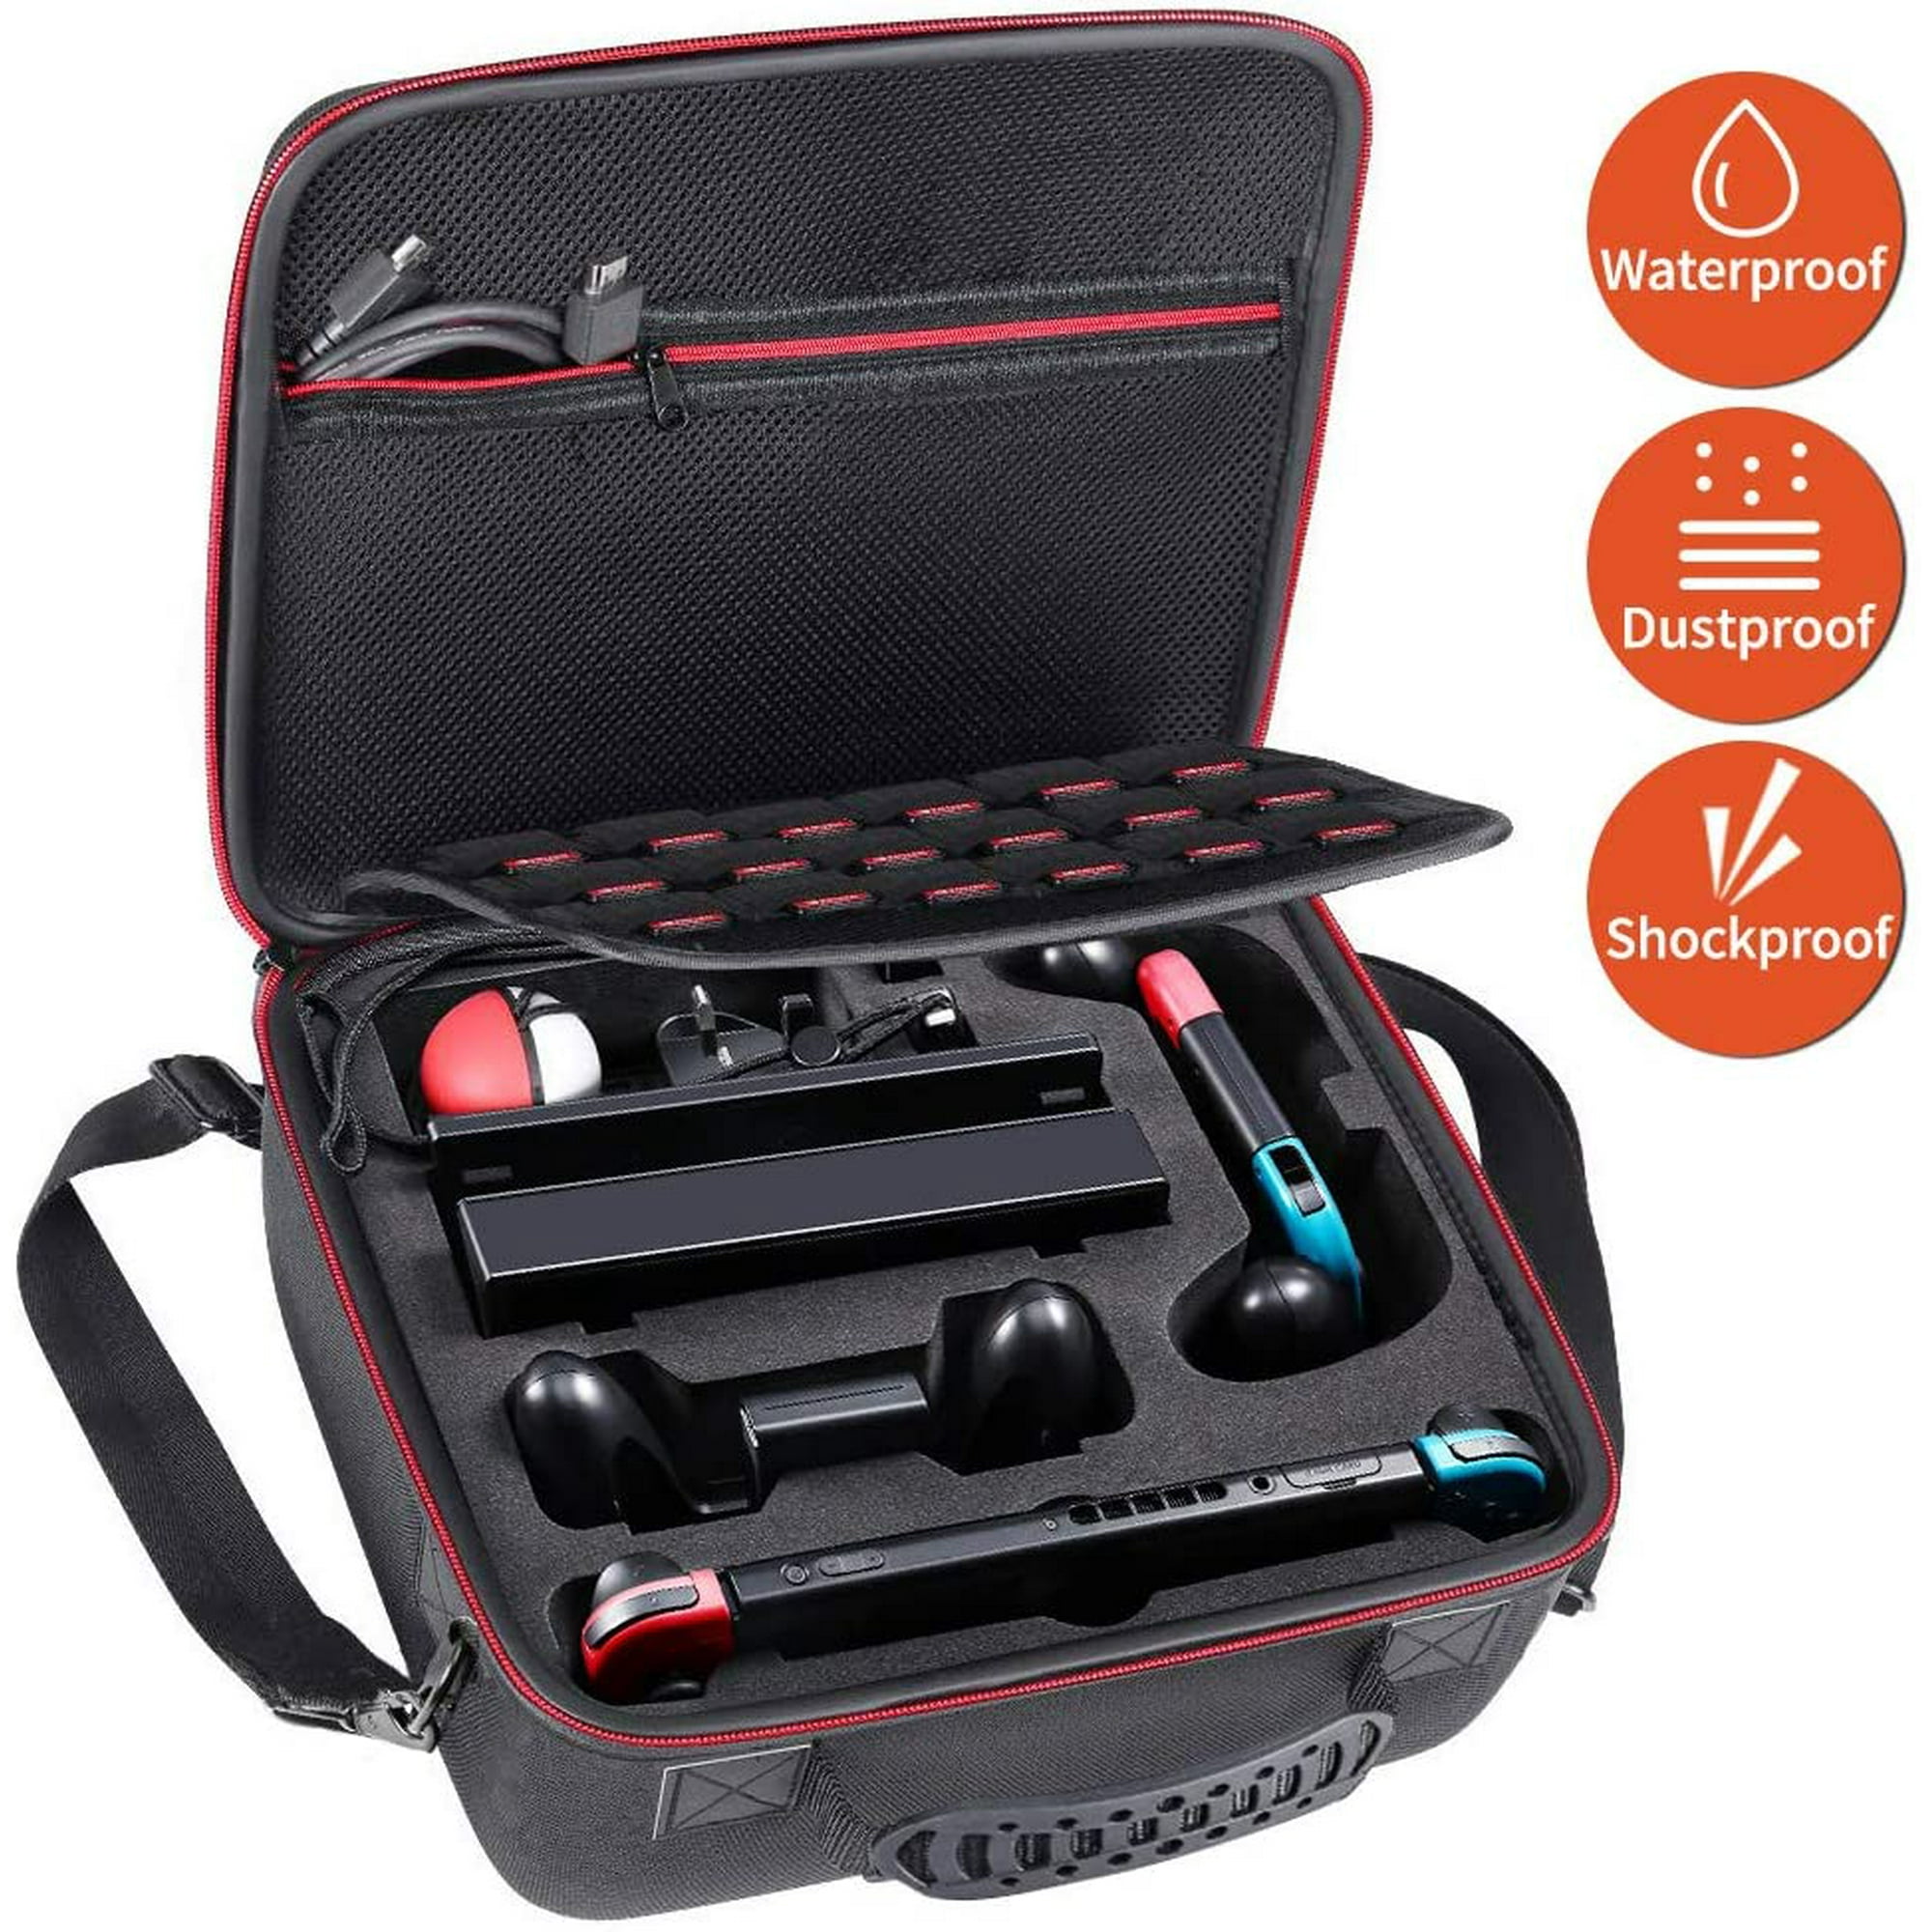 ZOTO Carrying Case for Nintendo Switch, Deluxe Travel and Storage Case for Nintendo Switch System, Protective Hard Case Fits Switch Pro Controller,Switch Console and | Walmart Canada